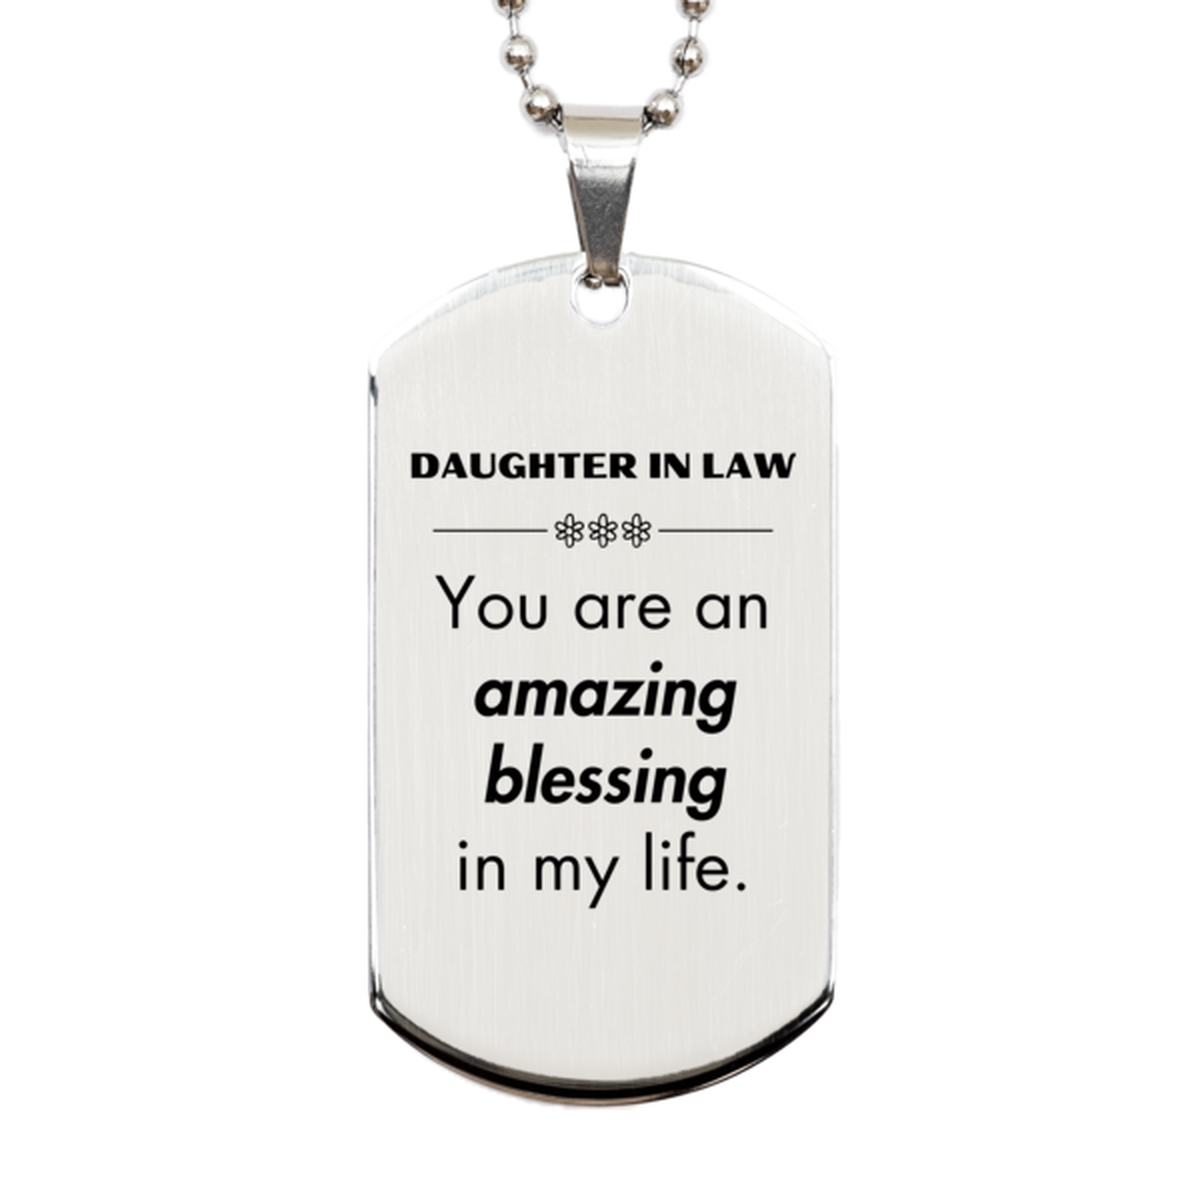 Daughter In Law Silver Dog Tag, You are an amazing blessing in my life, Thank You Gifts For Daughter In Law, Inspirational Birthday Christmas Unique Gifts For Daughter In Law